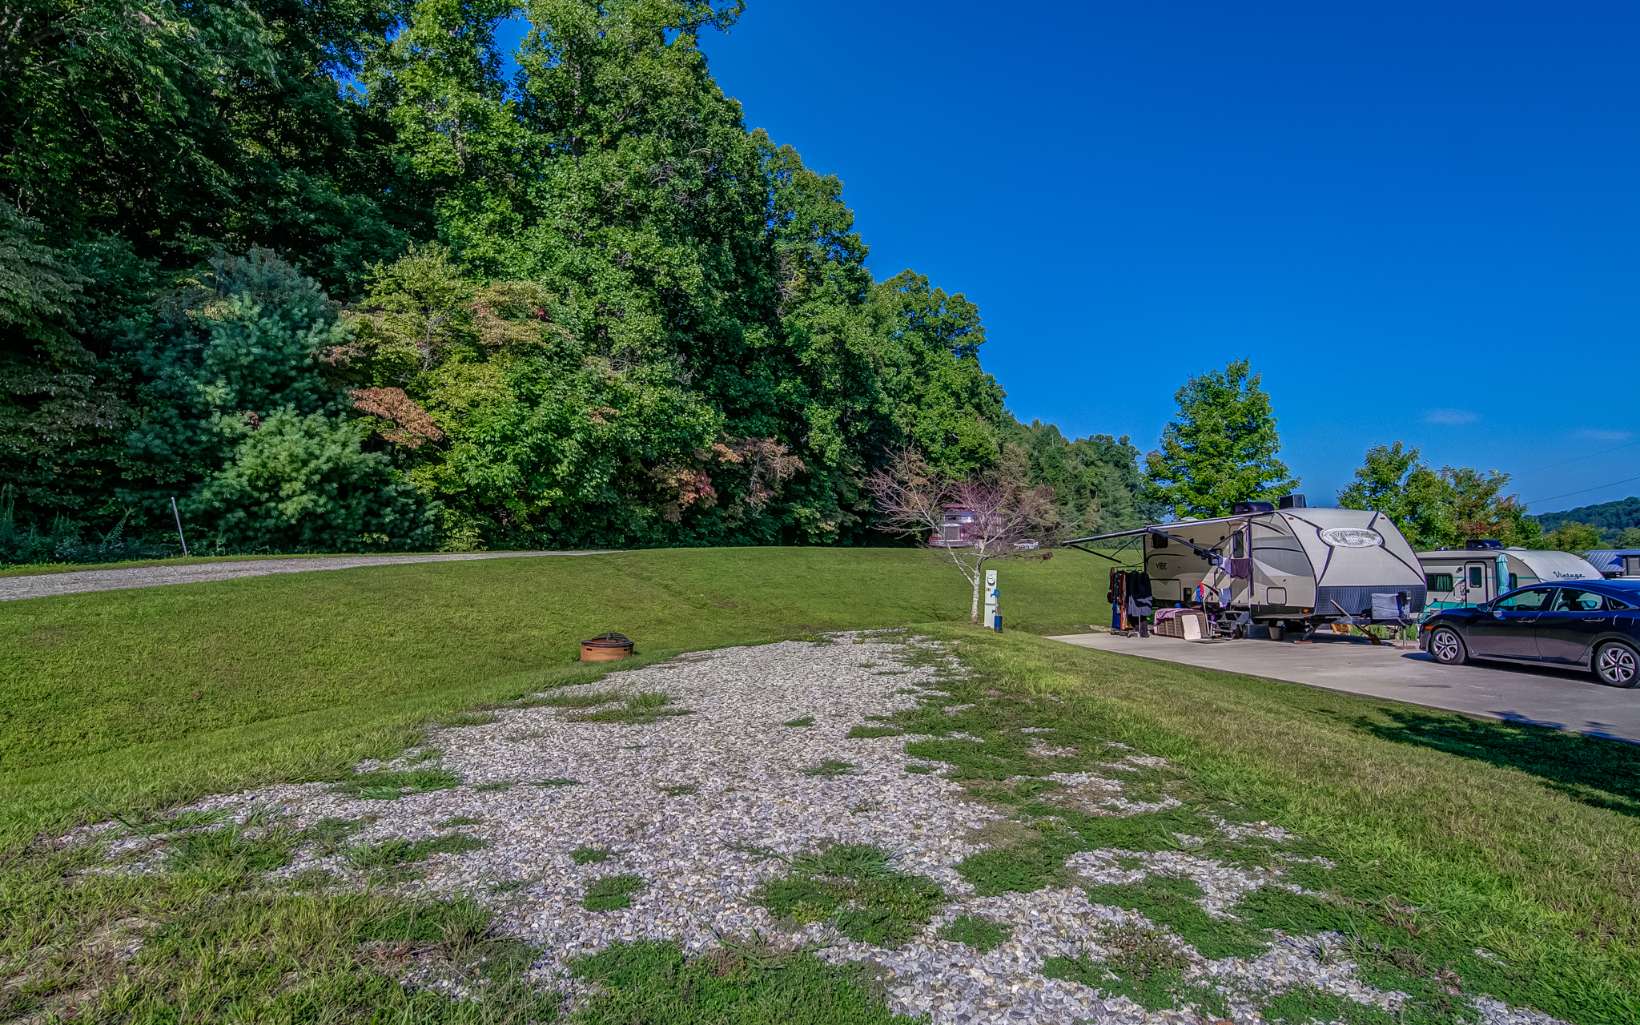 Beautiful pull-through gravel lot in the desirable Tiny Home and RV Community of Waterside at Blue Ridge, surrounded by the Chattahoochee National Forest. Amazing amenities to accommodate a magical getaway! This level lot has all hookups available, and the community features a Pool, Hot Tub, Playground, Waterfront Clubhouse, Laundry Facility, Community Kitchen with Wood Fired Pizza Oven, Fire Pits, Kayak Racks and Tubing, Fishing Dock and Stocked Community Lake, Disc Golf & Basketball. And that doesn't even include all that the stunning Blue Ridge area has to offer with extensive hiking trails, shopping, dining and outdoor recreation. Keep the lot as is, or build your dream Tiny Home; Use it for yourself, or as a short term rental. The possibilities are enless! Stop by today, this lot won't be available for long!!